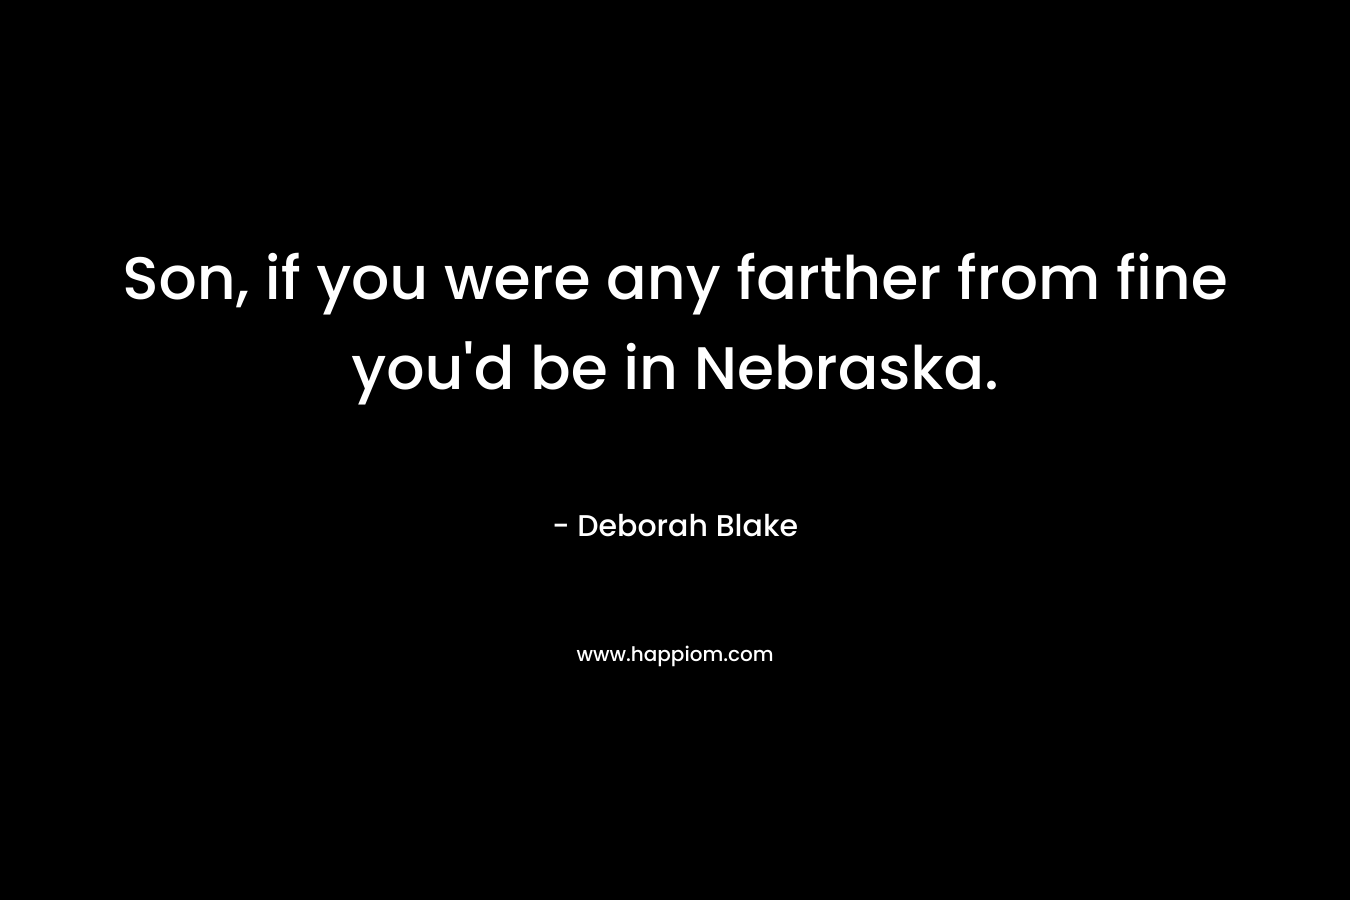 Son, if you were any farther from fine you'd be in Nebraska.